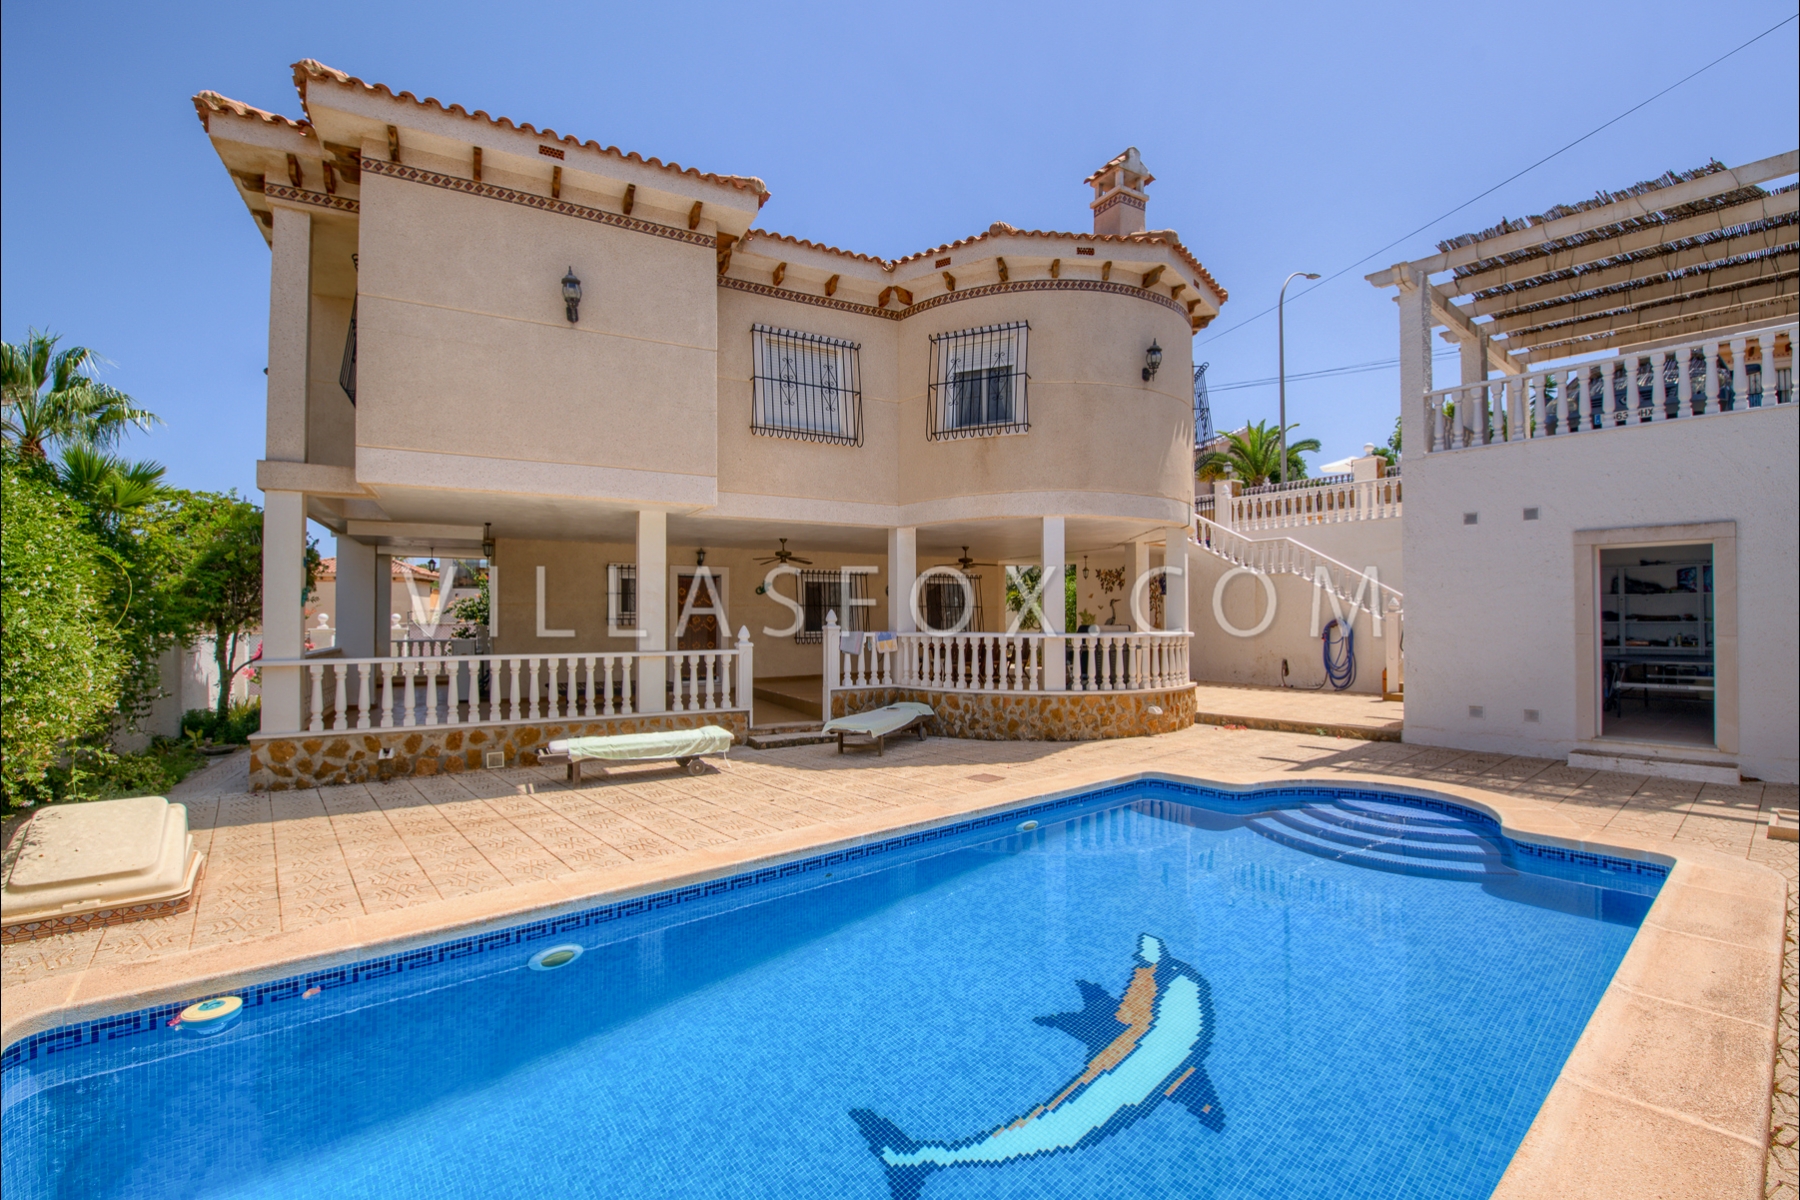 Villasmaría luxury villa with guest apartment, games room and private pool!